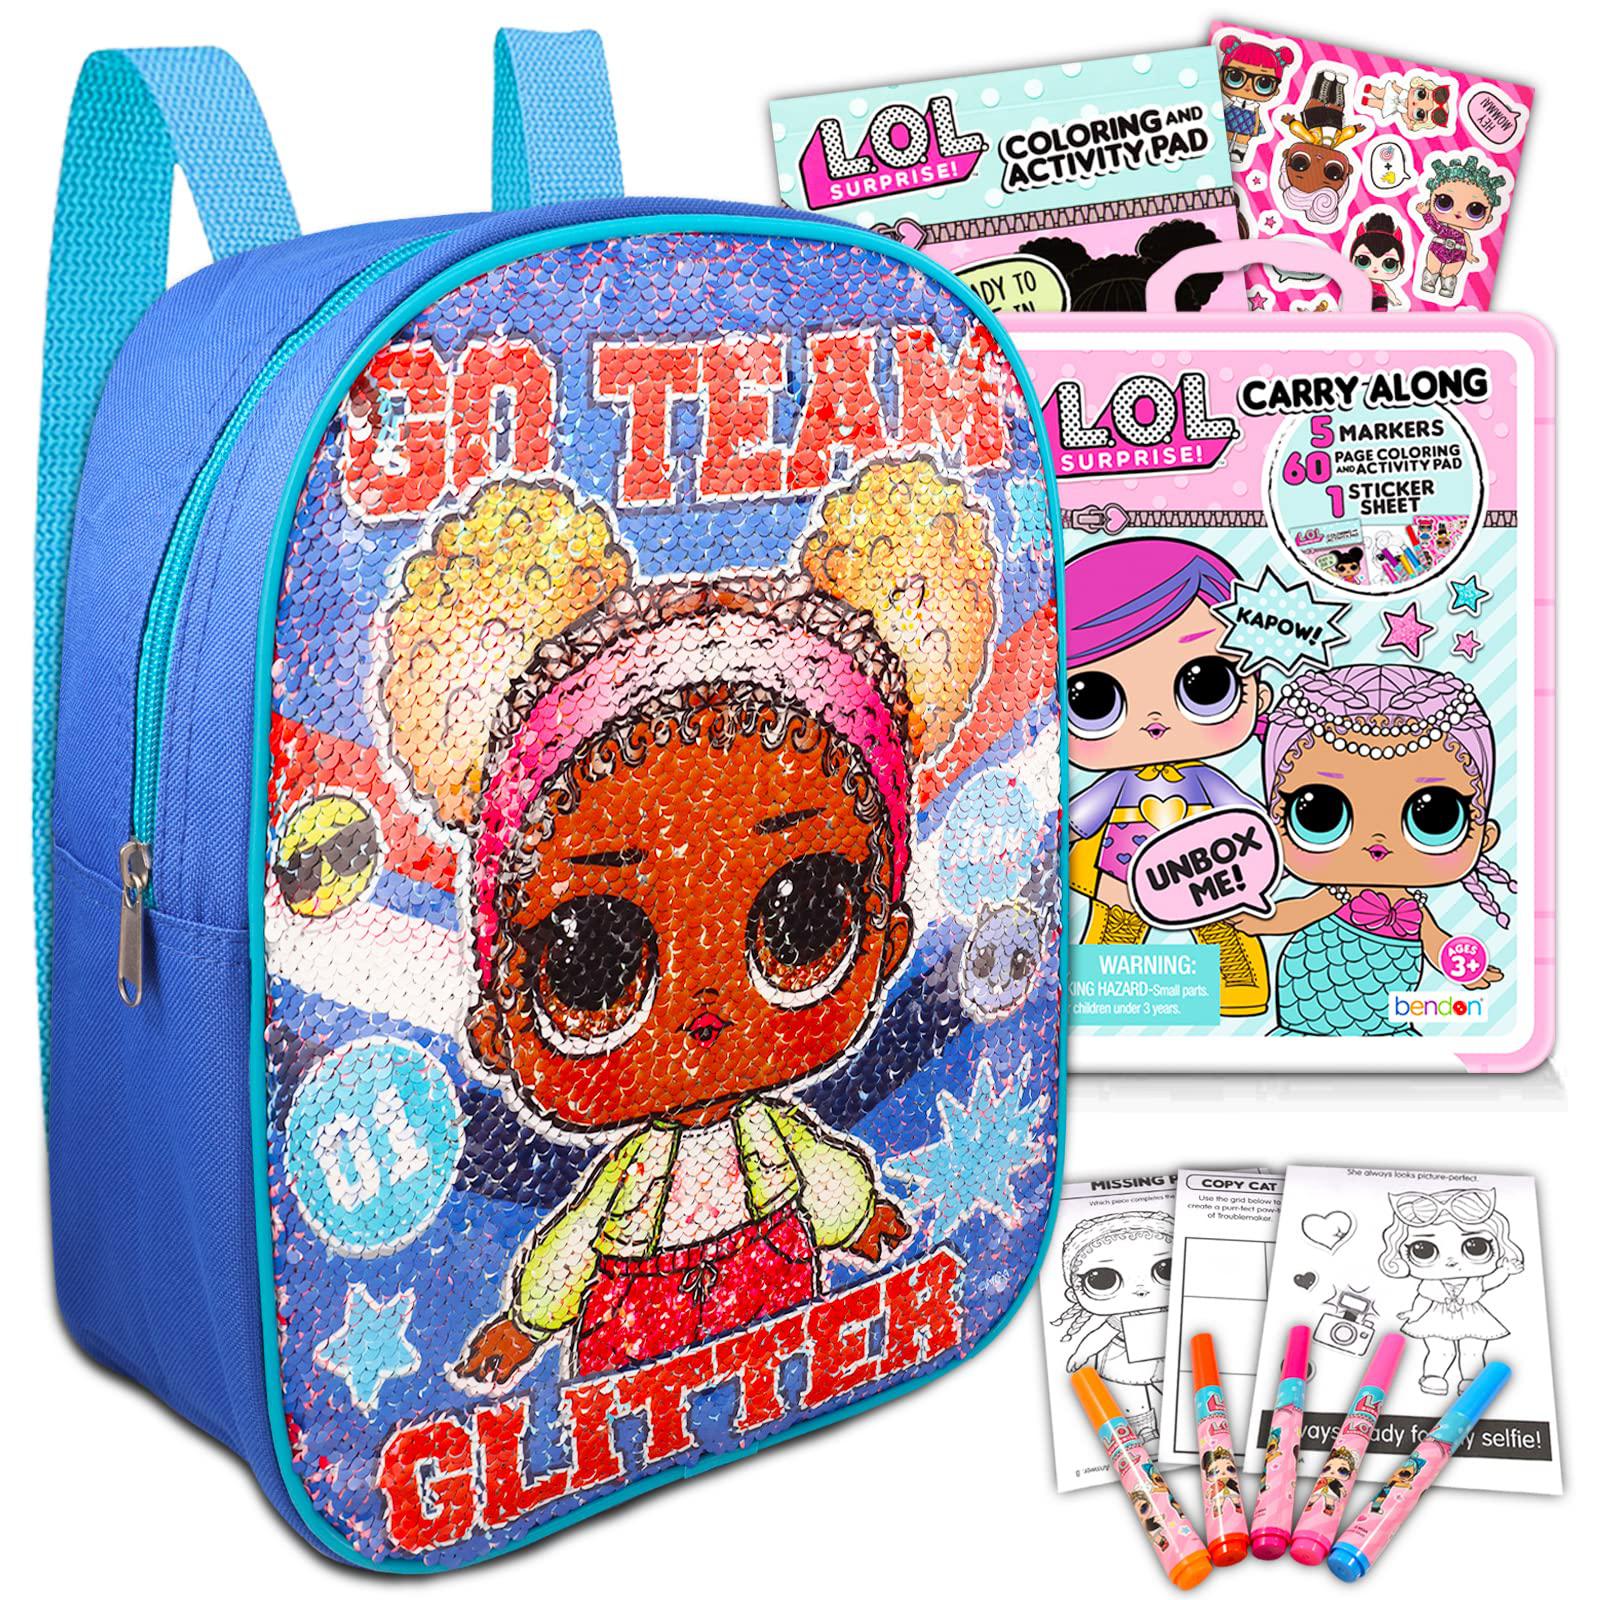 L.O.L. Surprise! lol doll mini backpack and art carry along case - lol doll gift bundle with 12" reversible sequin mini backpack and art case 